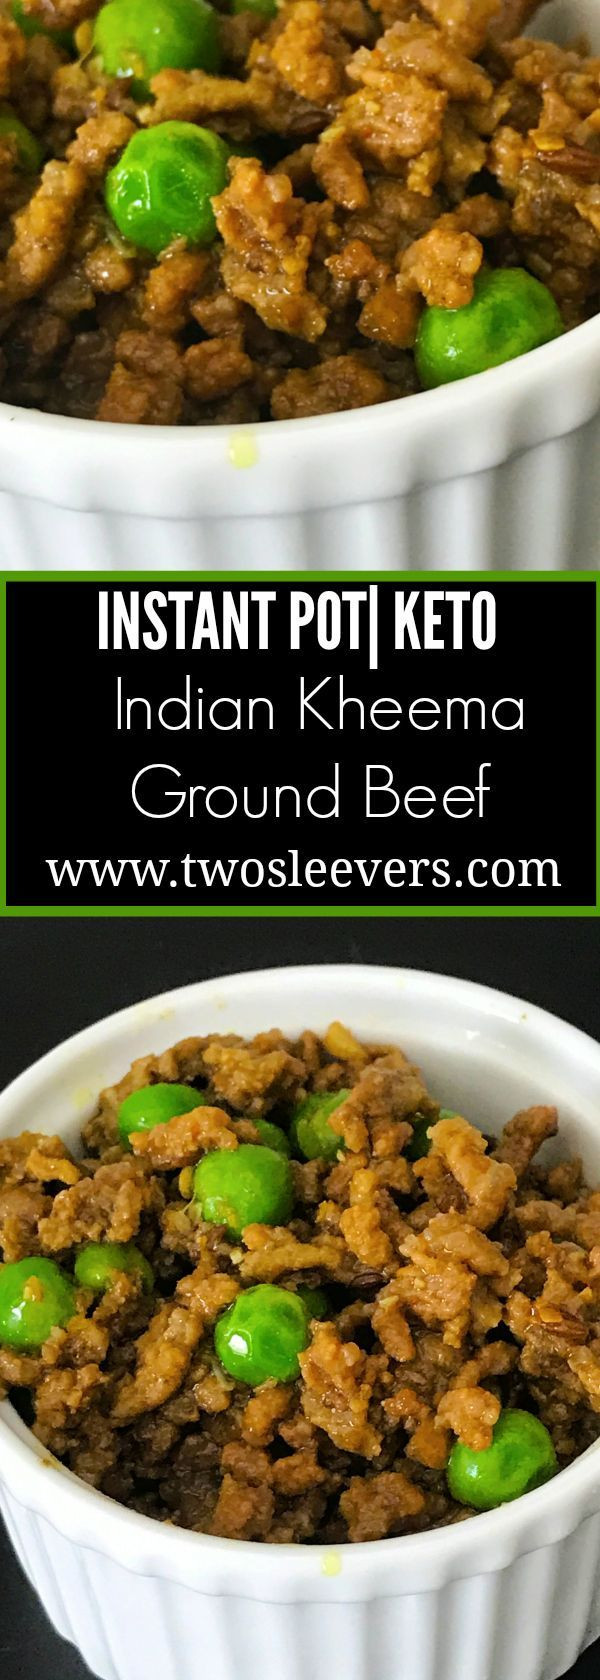 Instant Pot Recipes With Ground Beef Keto
 Instant Pot Keto Indian Kheema Easy low carb recipe for